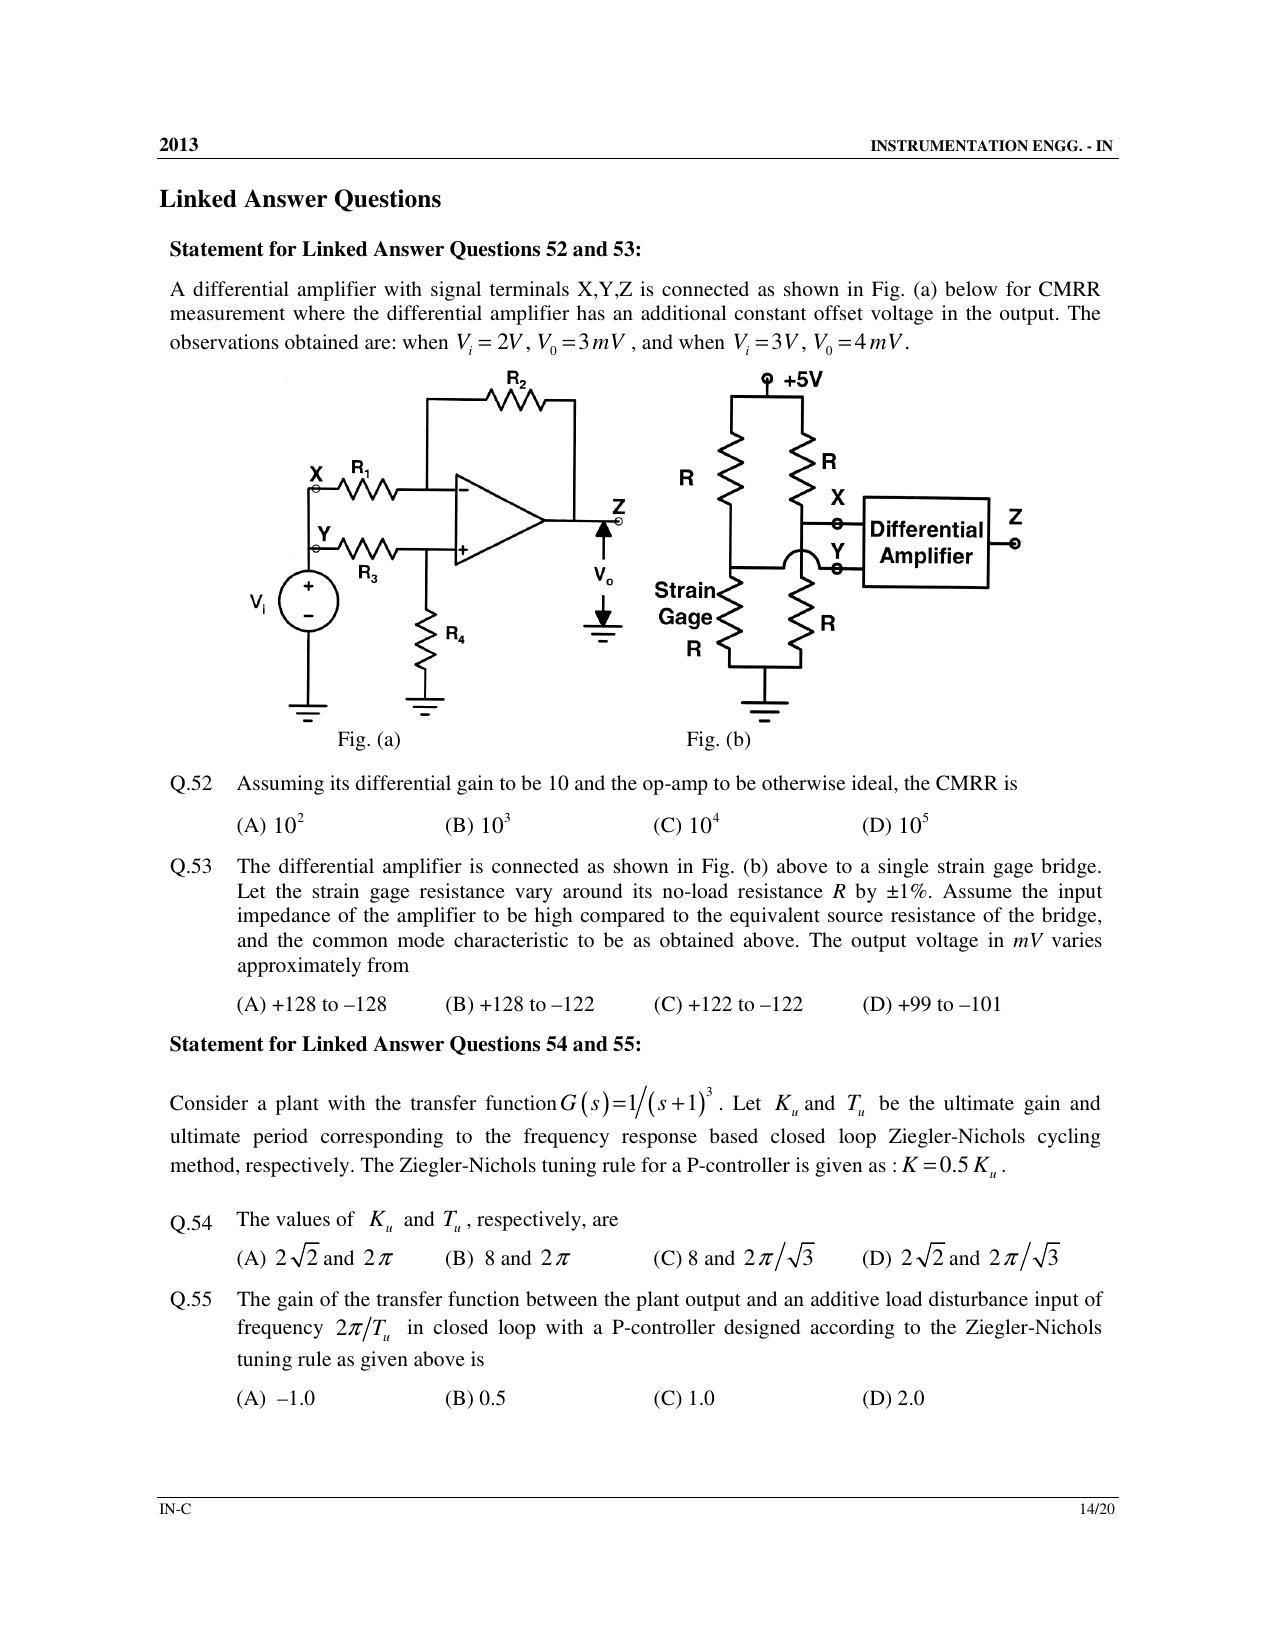 GATE 2013 Instrumentation Engineering (IN) Question Paper with Answer Key - Page 49